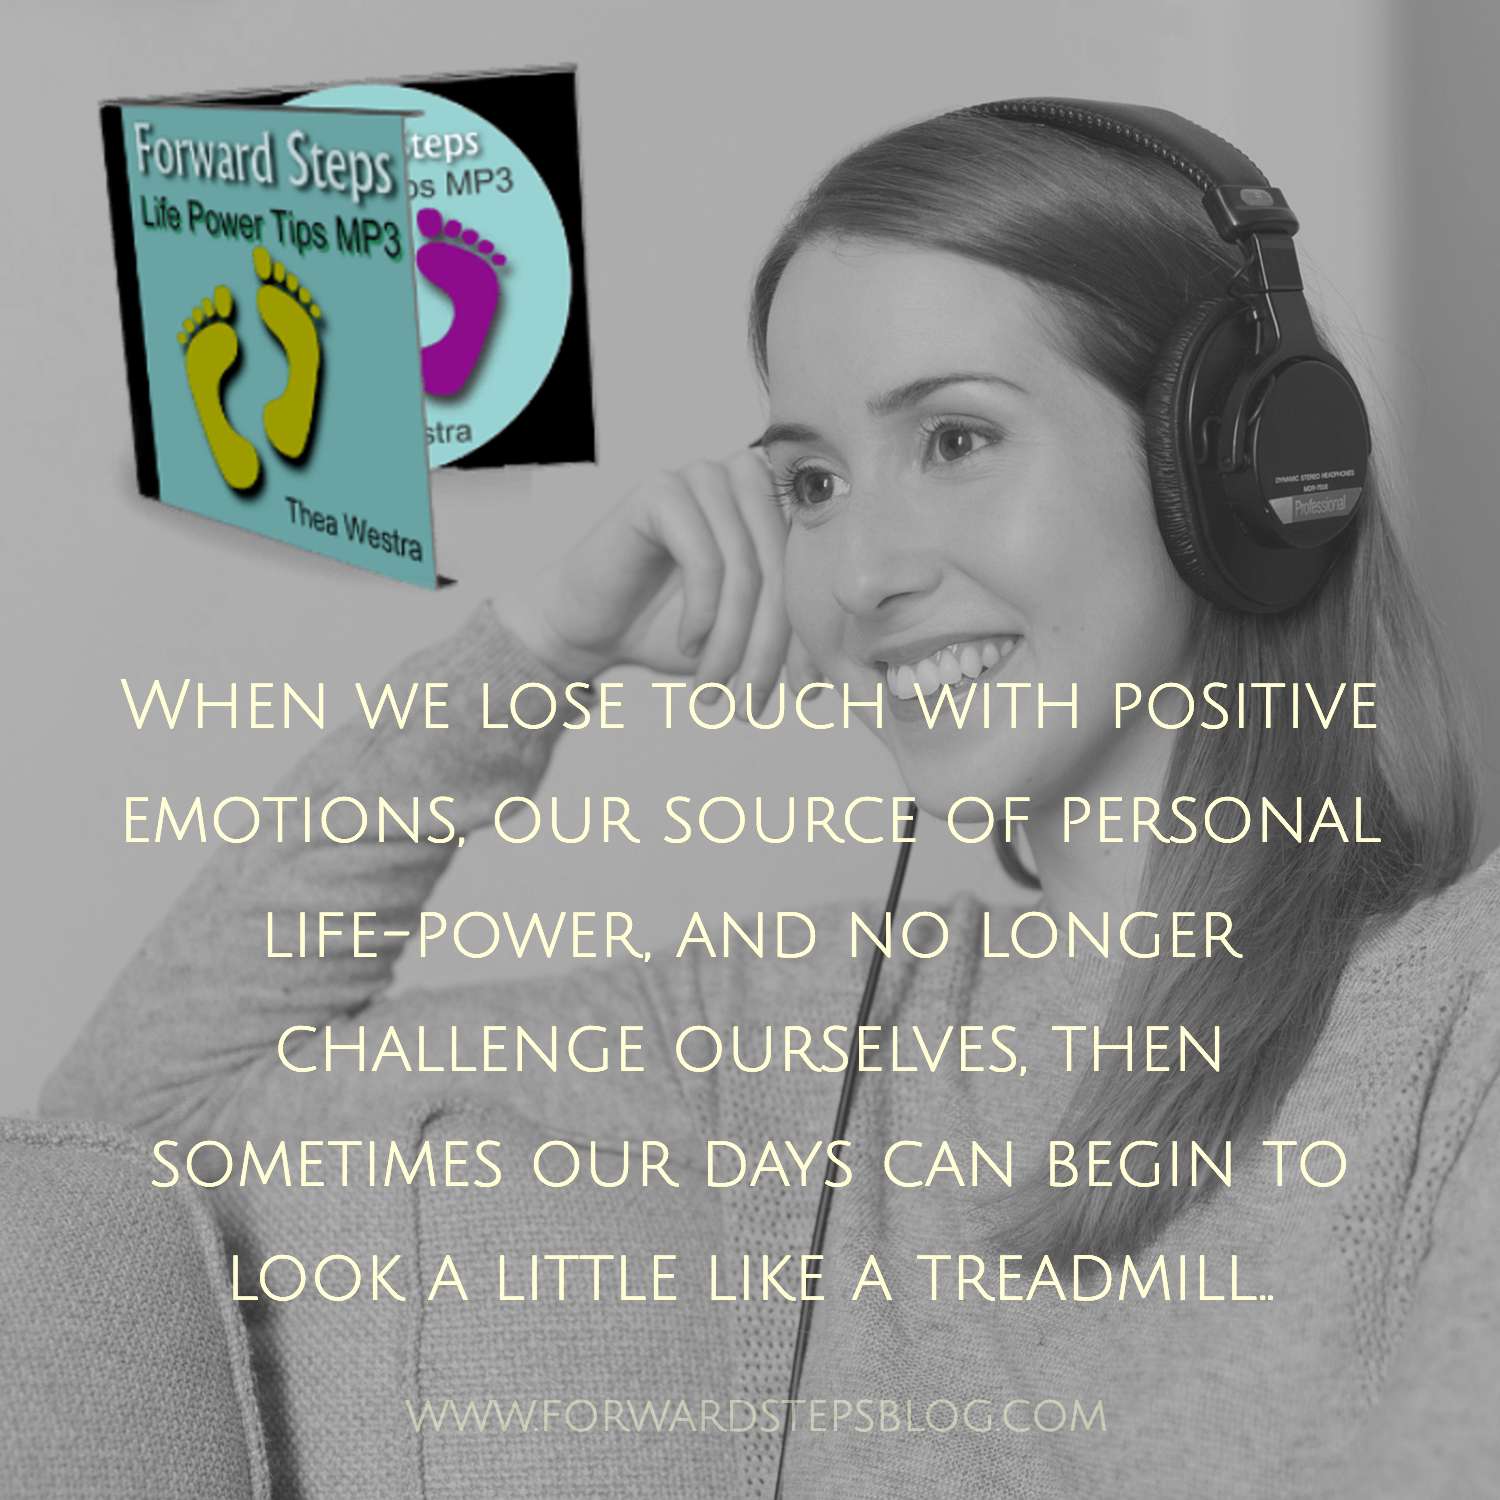 FREE AUDIO 100 Life Power Tips 50-Min. MP3 <! --- NOTE: original size 1500px X 1500px. Change height & width to scale using https://selfimprovementgift.com/forwardsteps/image-resize/ -- ></noscript>